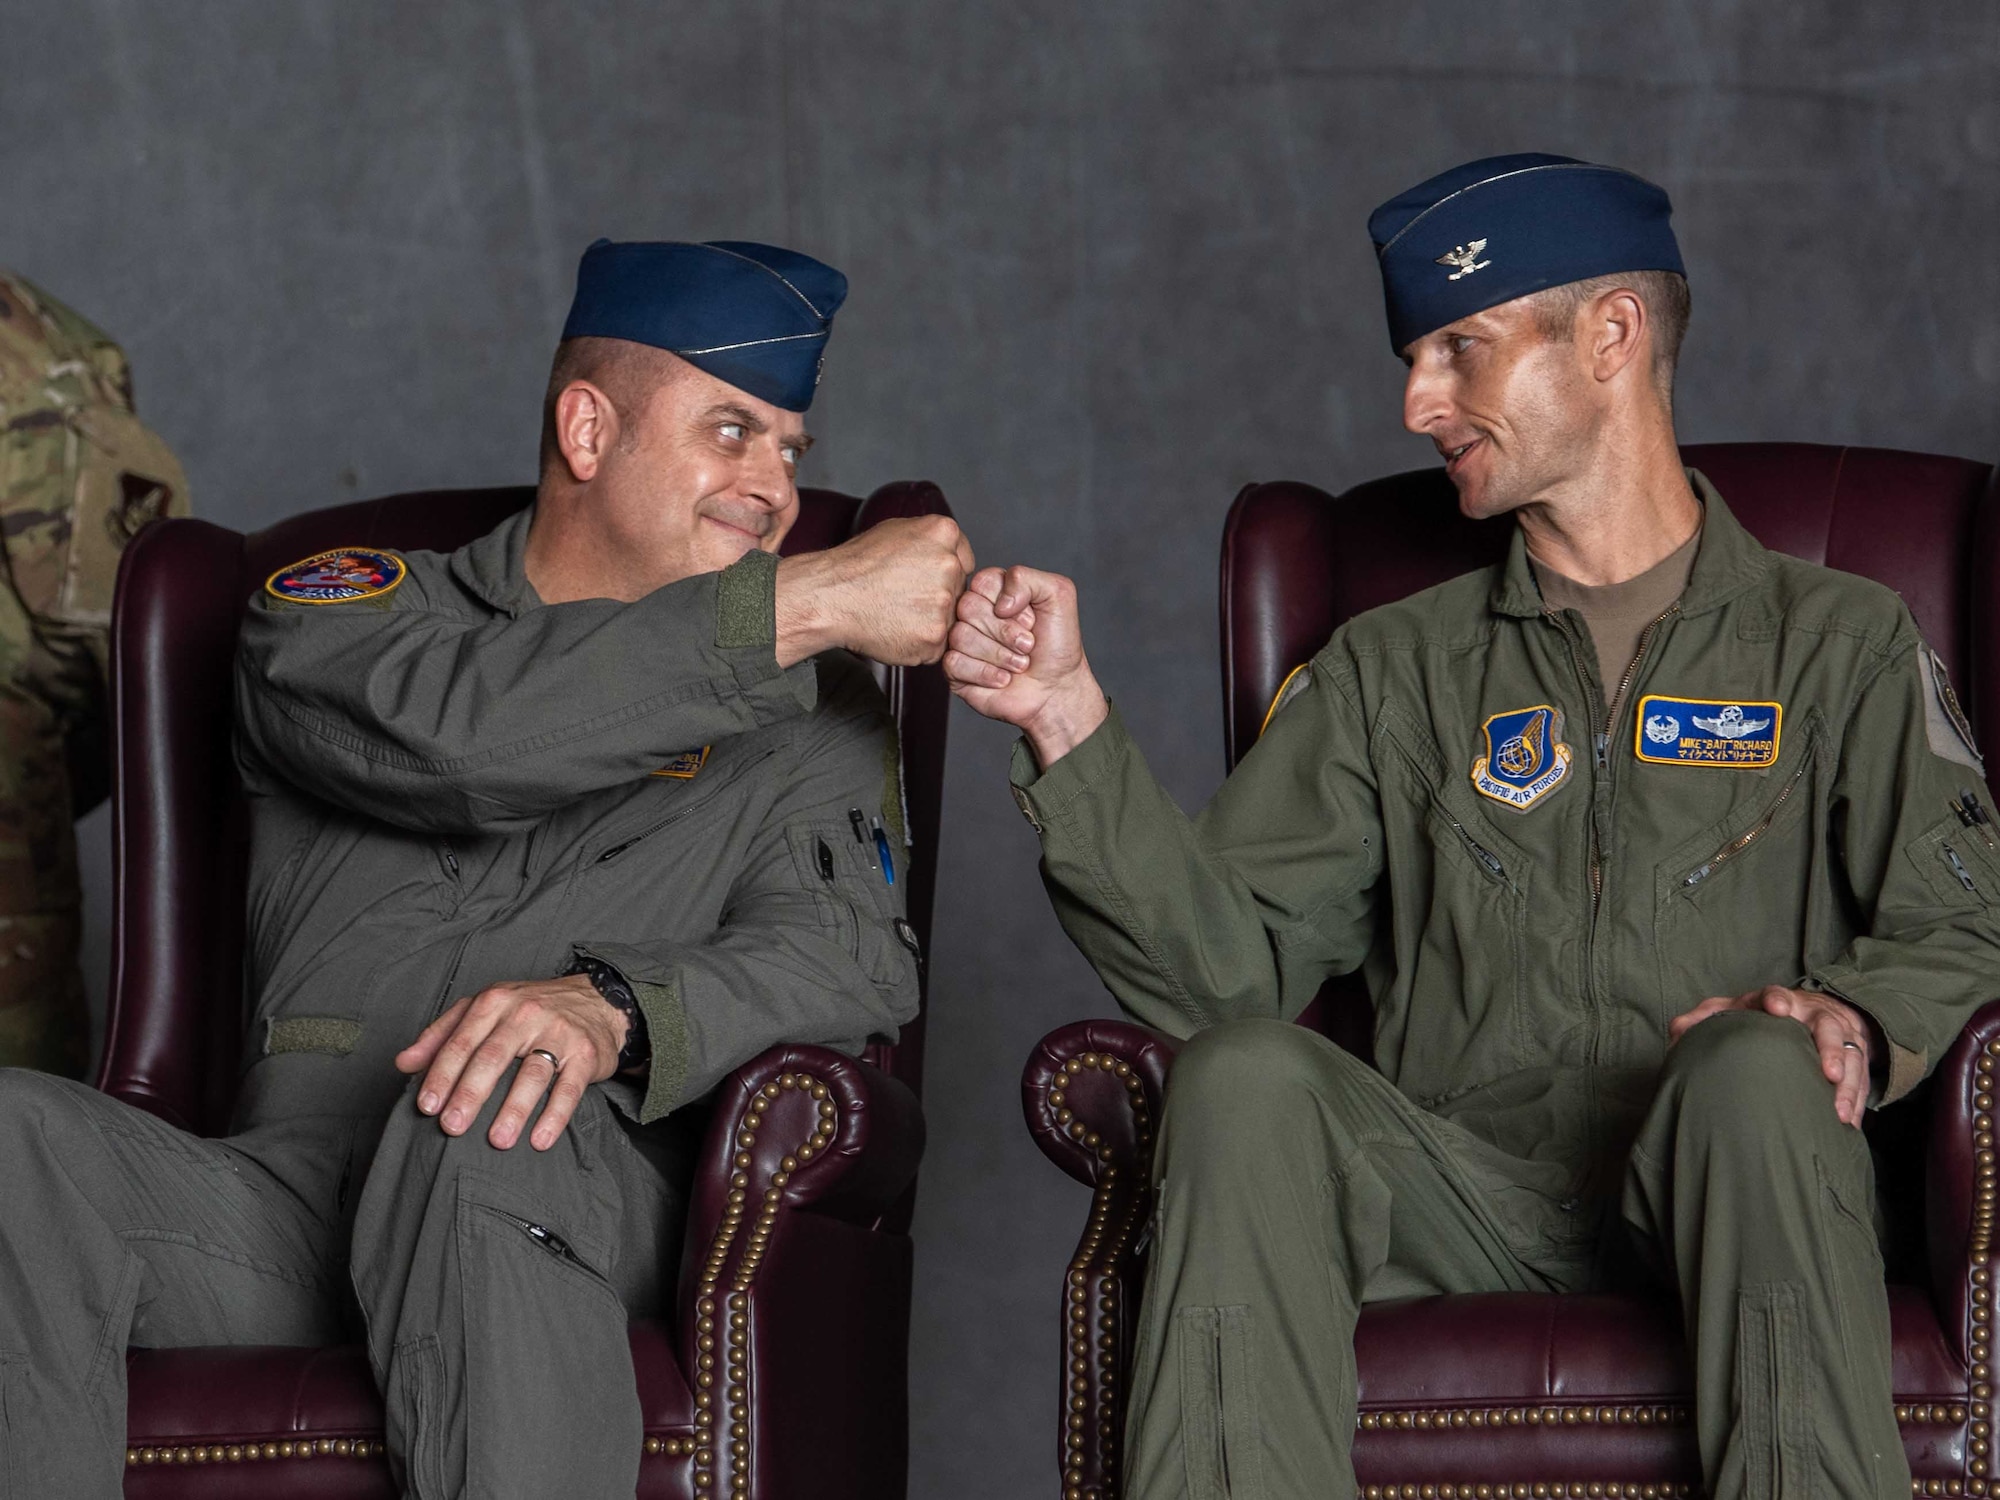 United States Air Force Col. Jesse J. Friedel, left, 35th Fighter Wing (FW) outgoing commander, congratulates Col. Michael P. Richard, right, 35th FW incoming commander, after remarks from Lt. Gen. Ricky N. Rupp, U.S. Forces Japan and 5th Air Force commander, during the 35th FW change of command ceremony at Misawa Air Base, Japan, June 30, 2022.